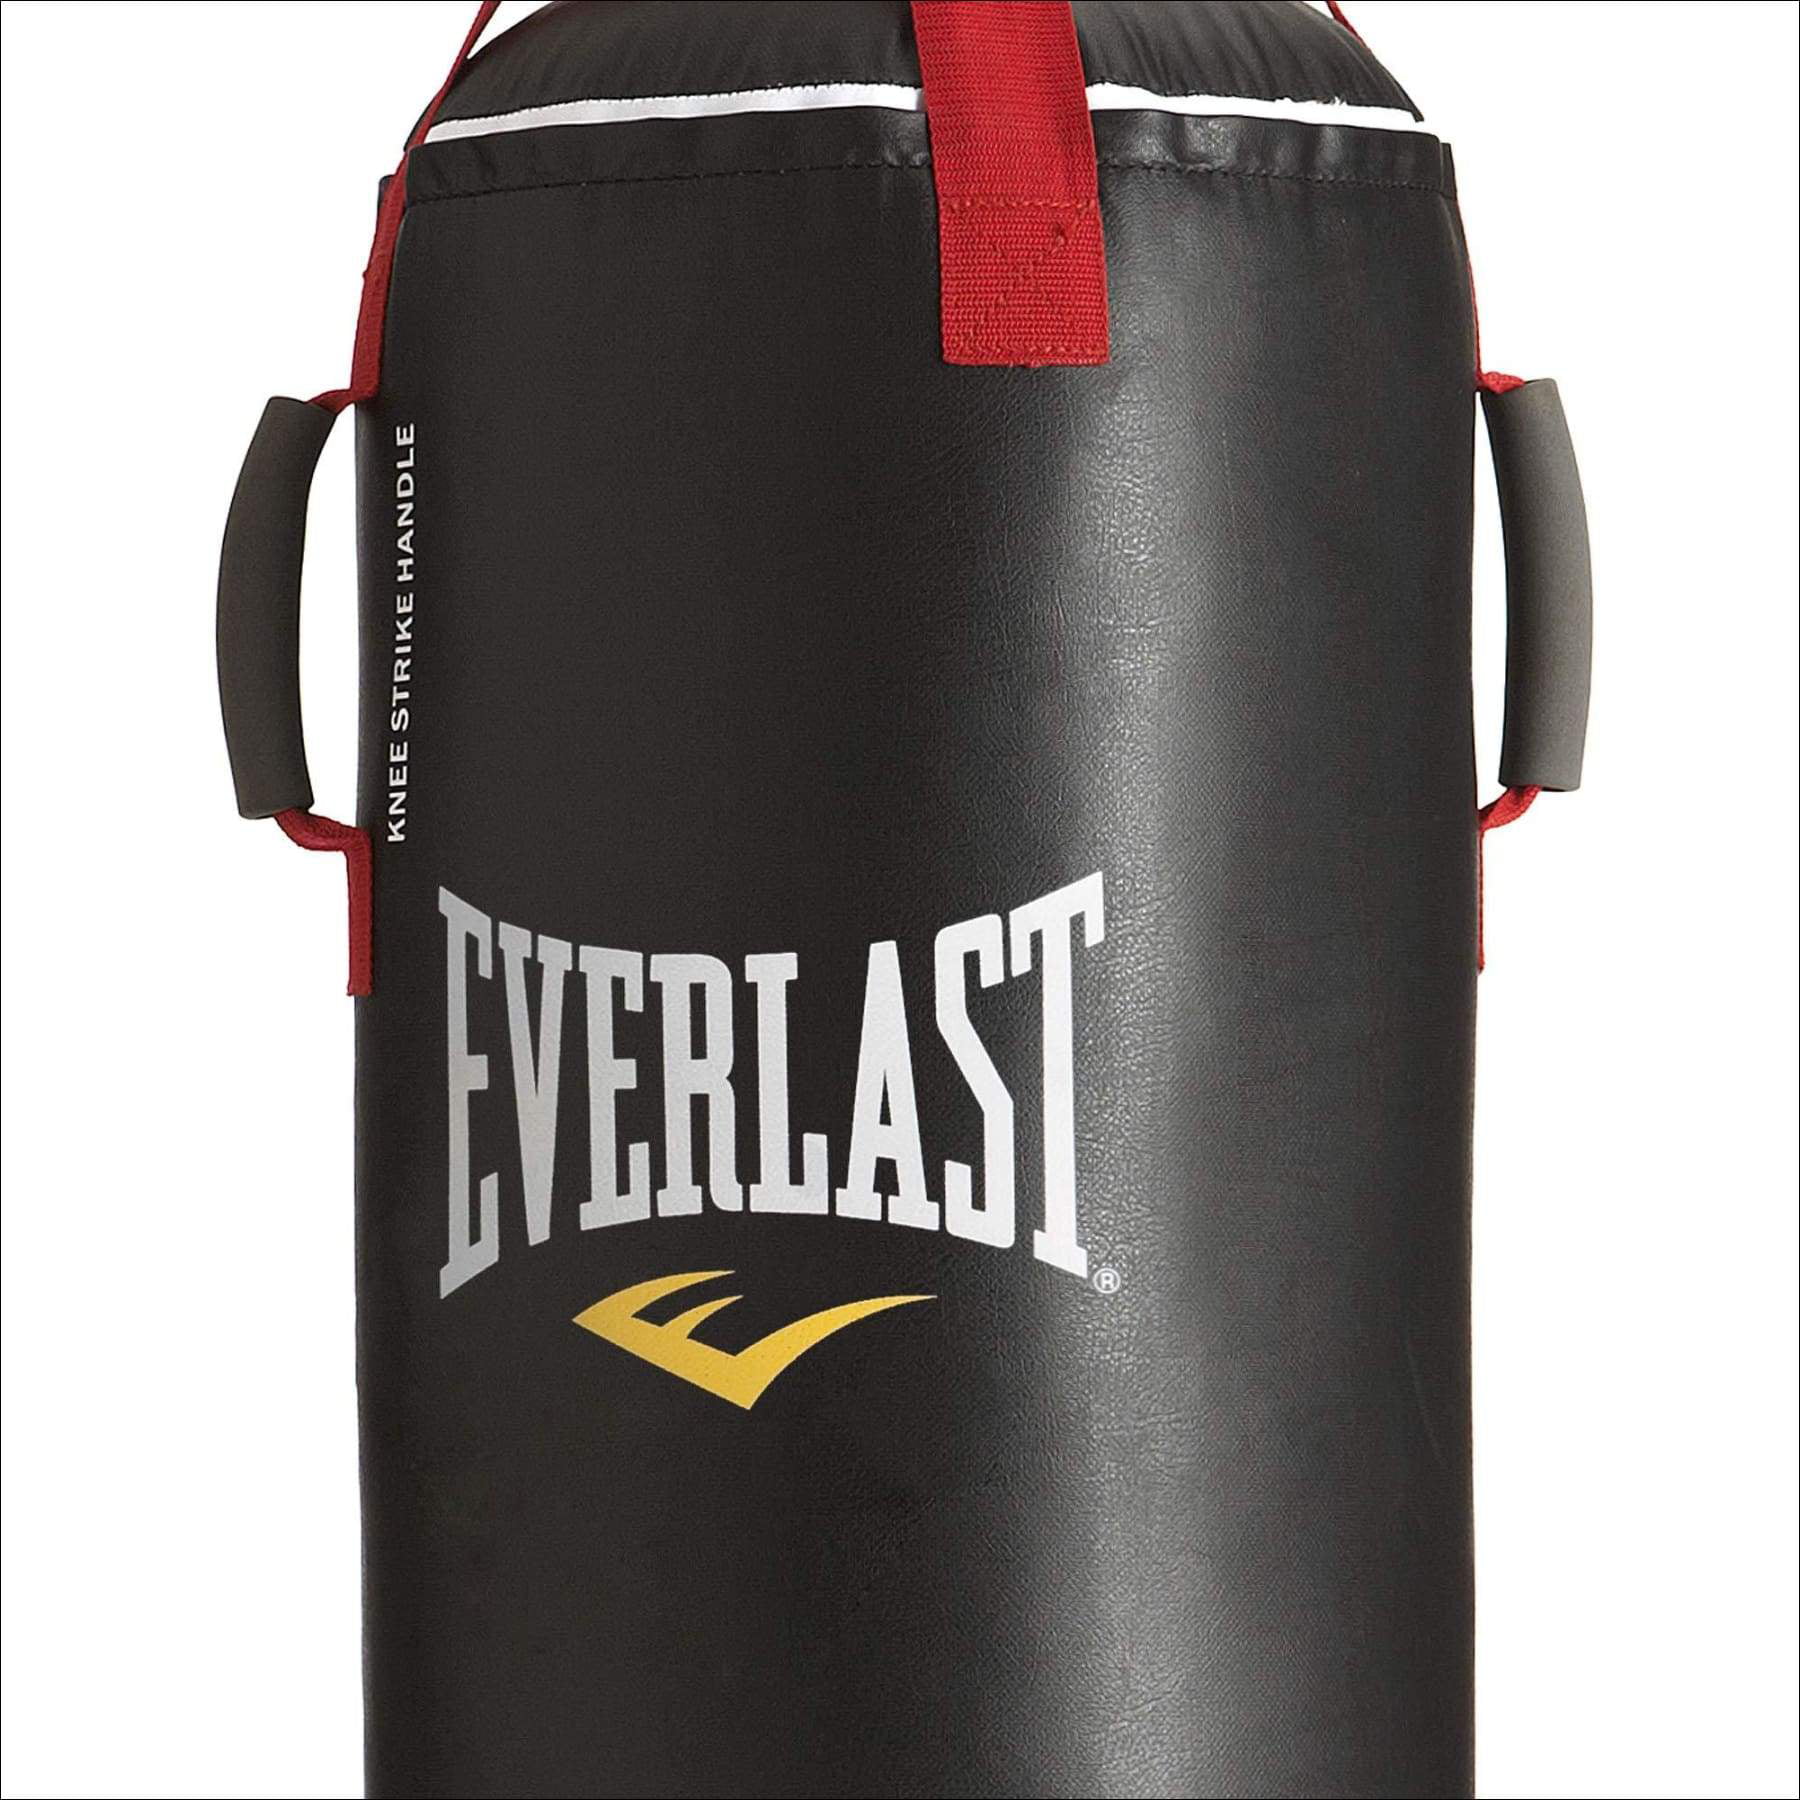 Everlast MMA Punching bag for Sale in Elk Grove, CA - OfferUp